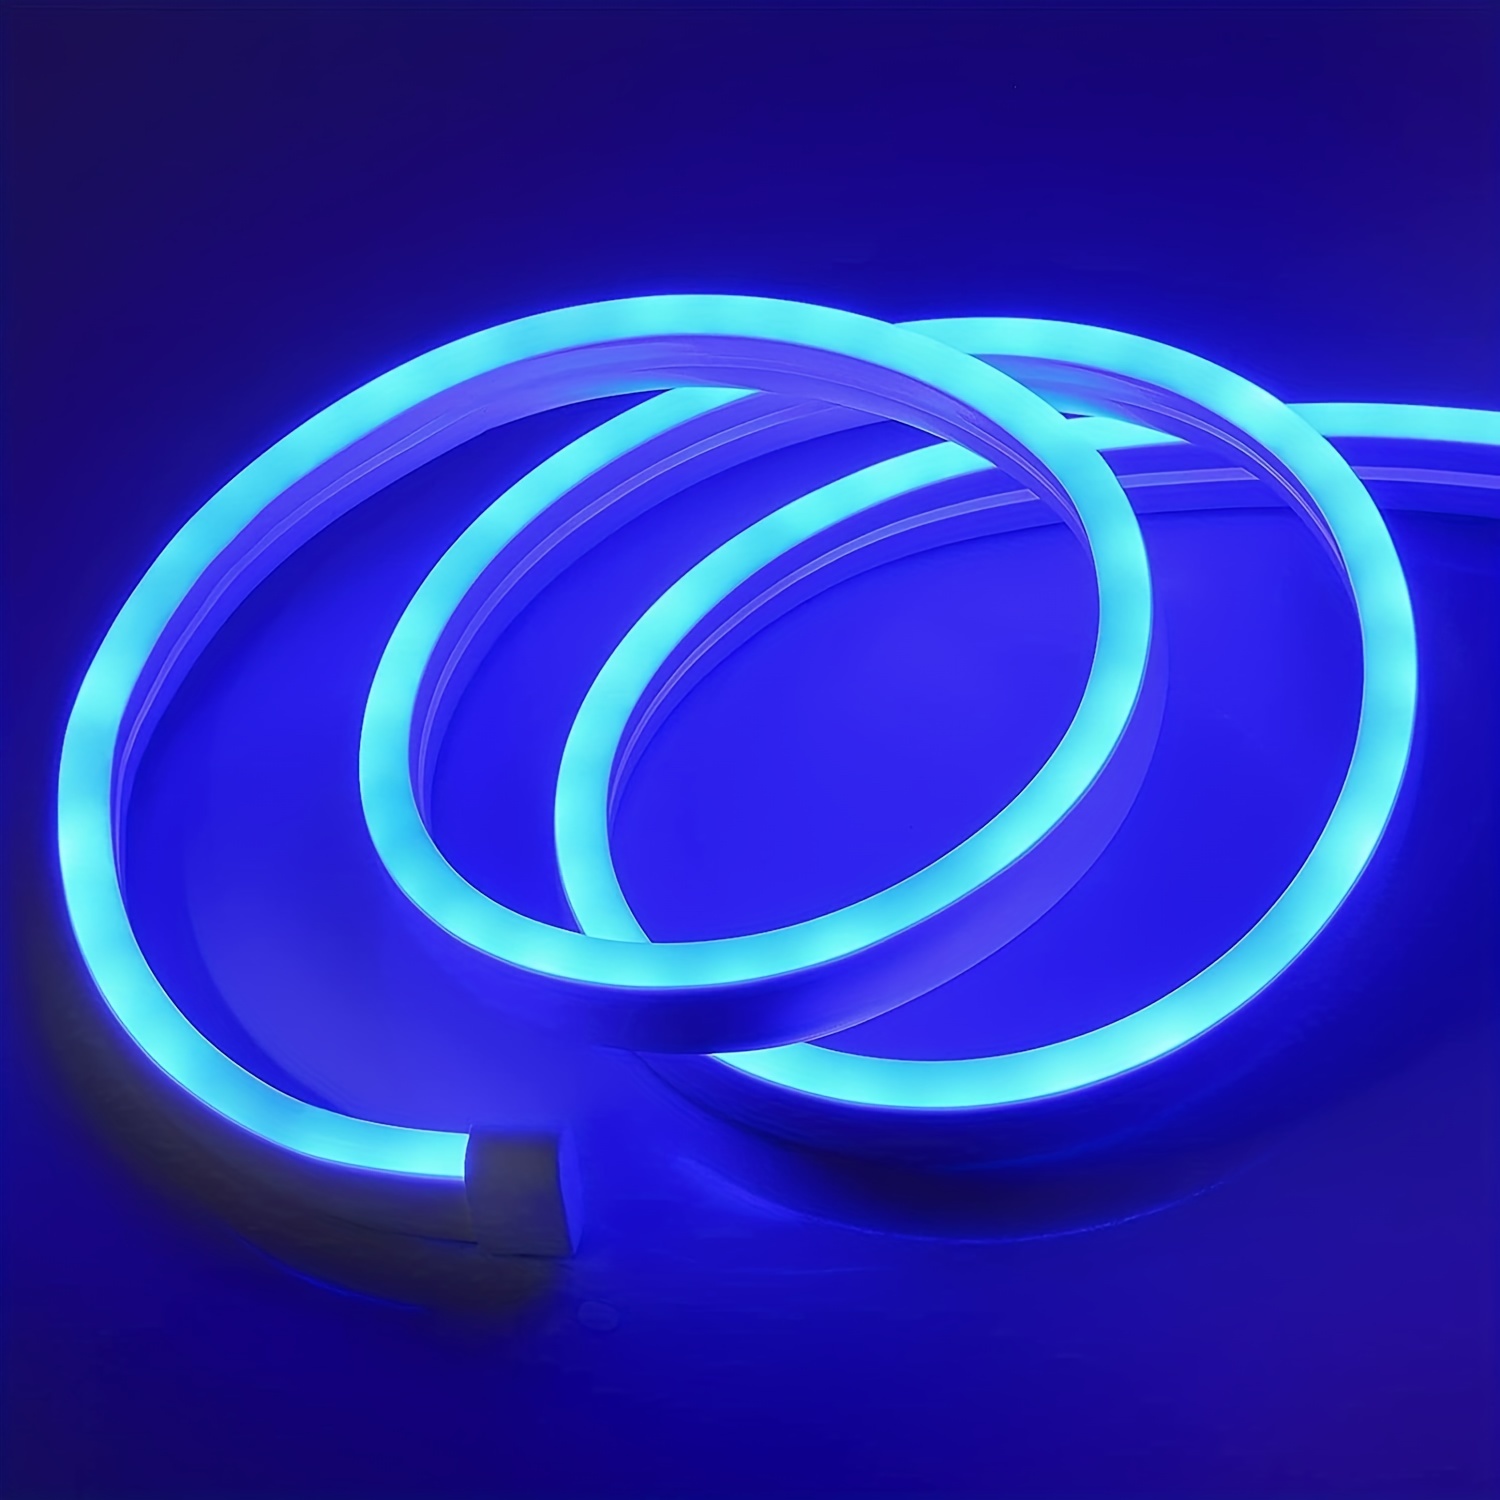 M.best 6.56ft USB LED Strip Lights Waterproof Flexible LED Neon Tape Lights  with Switch for Bedroom Indoors Outdoors